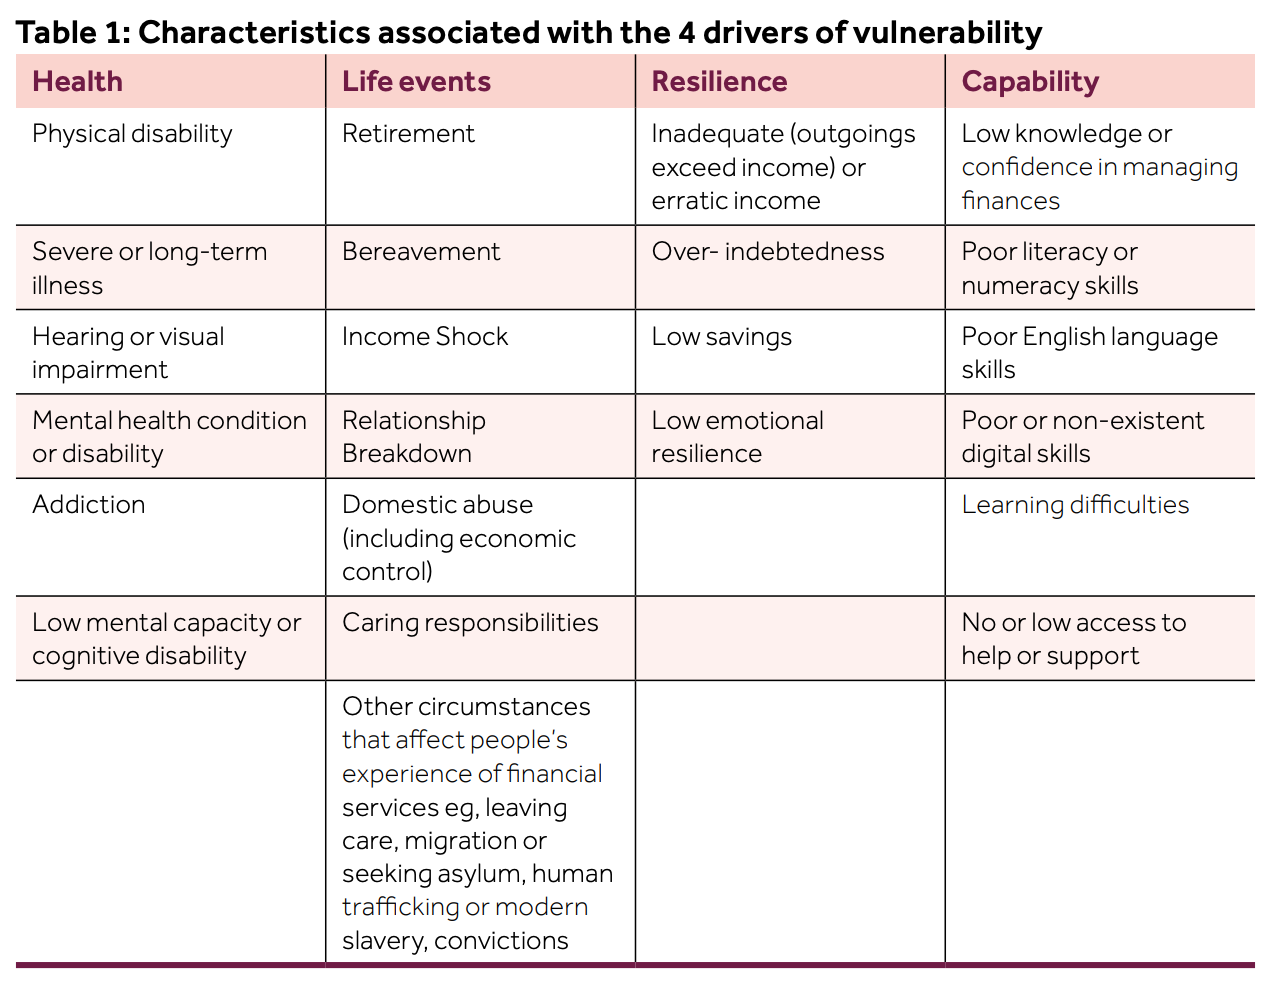 Table: Characteristics associated with the 4 drivers of vulnerability. Examples of vulnerable characteristics are listed under four column headings; 'Health' 'Life events' 'Resilience' and 'Capability'